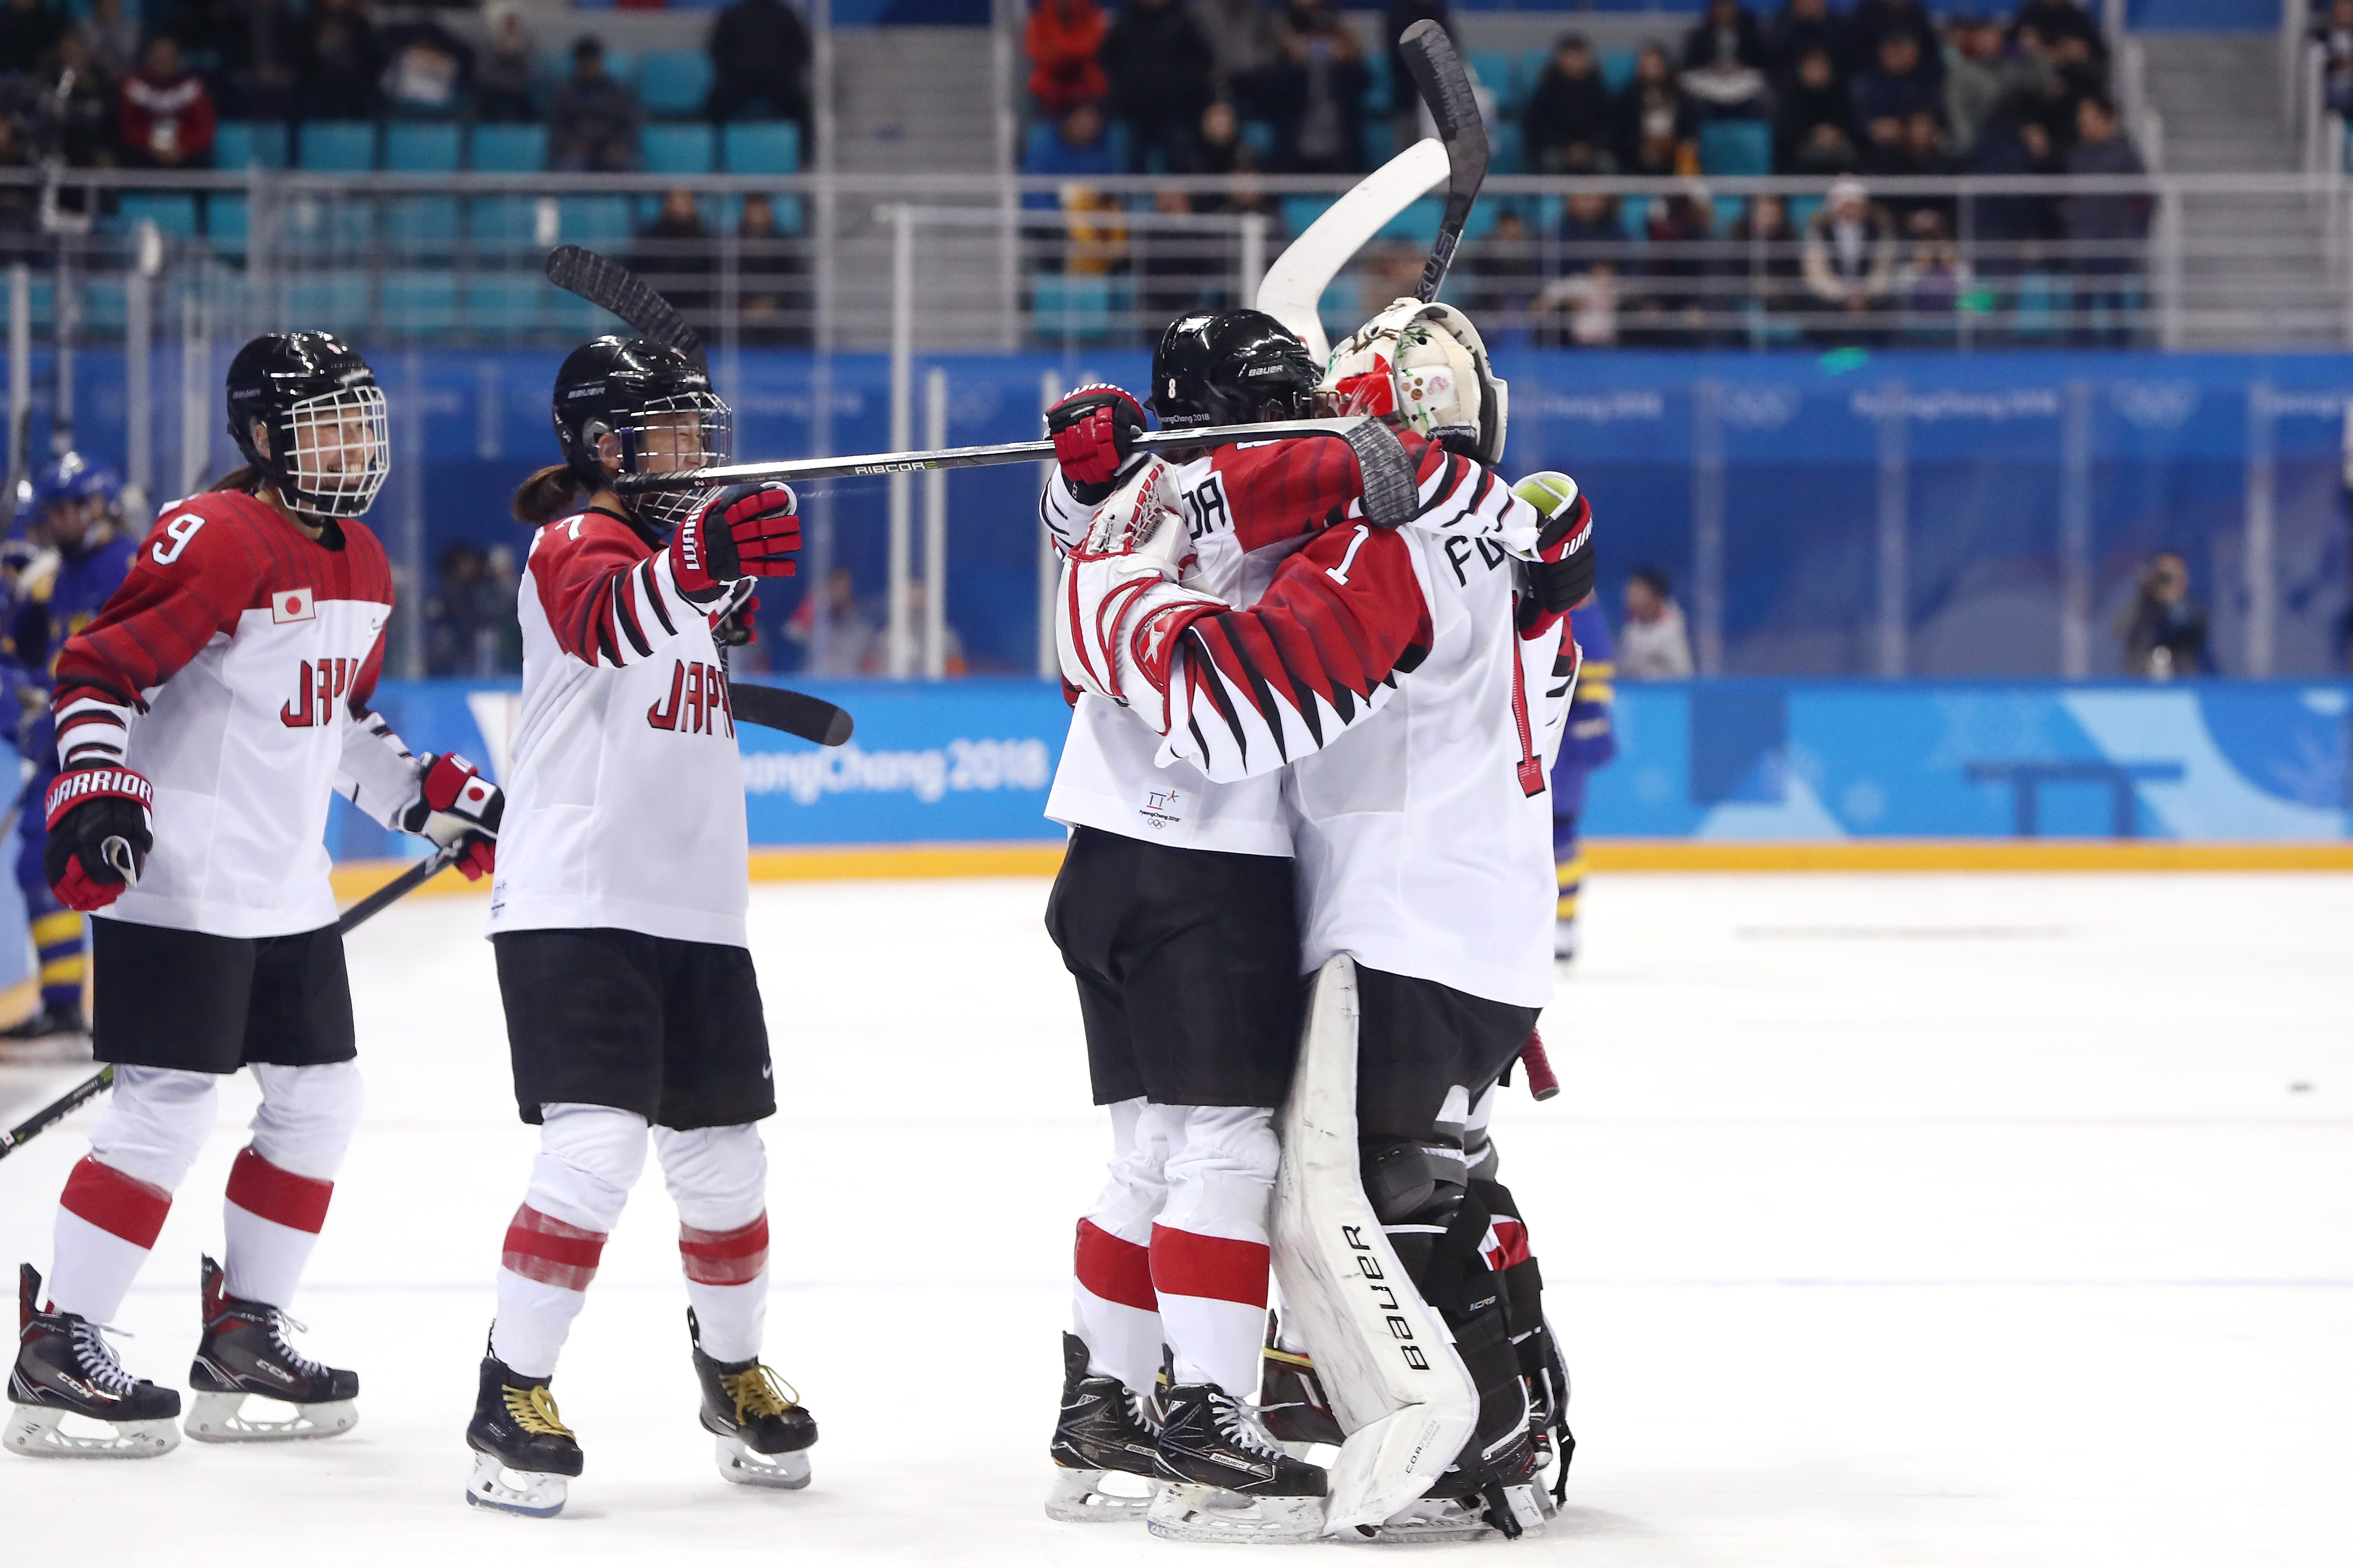 Nana Fujimoto #1 of Japan celebrates with teammates after defeating Sweden&nbsp;